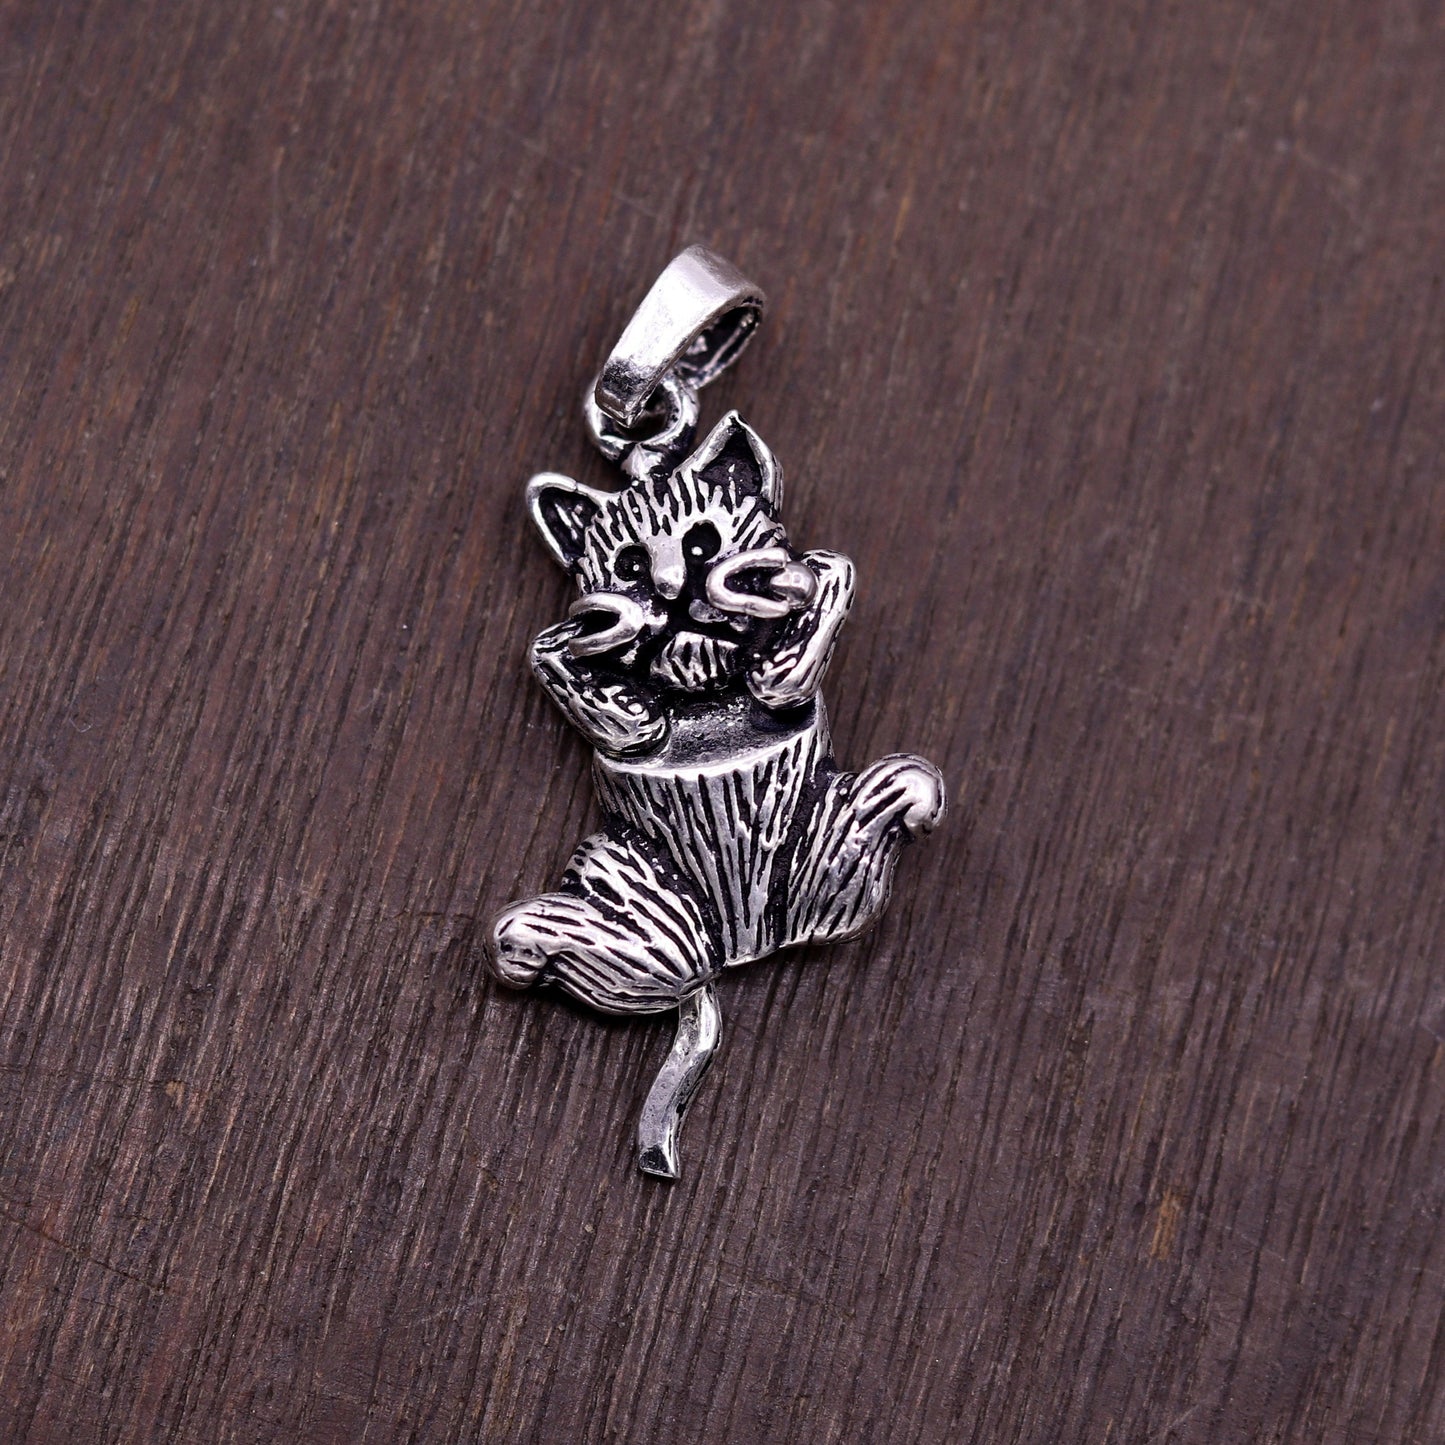 Amazing 925 sterling silver handcrafted fabulous animal cat pendant excellent stylish modern unisex gifting jewelry from india nsp219 - TRIBAL ORNAMENTS